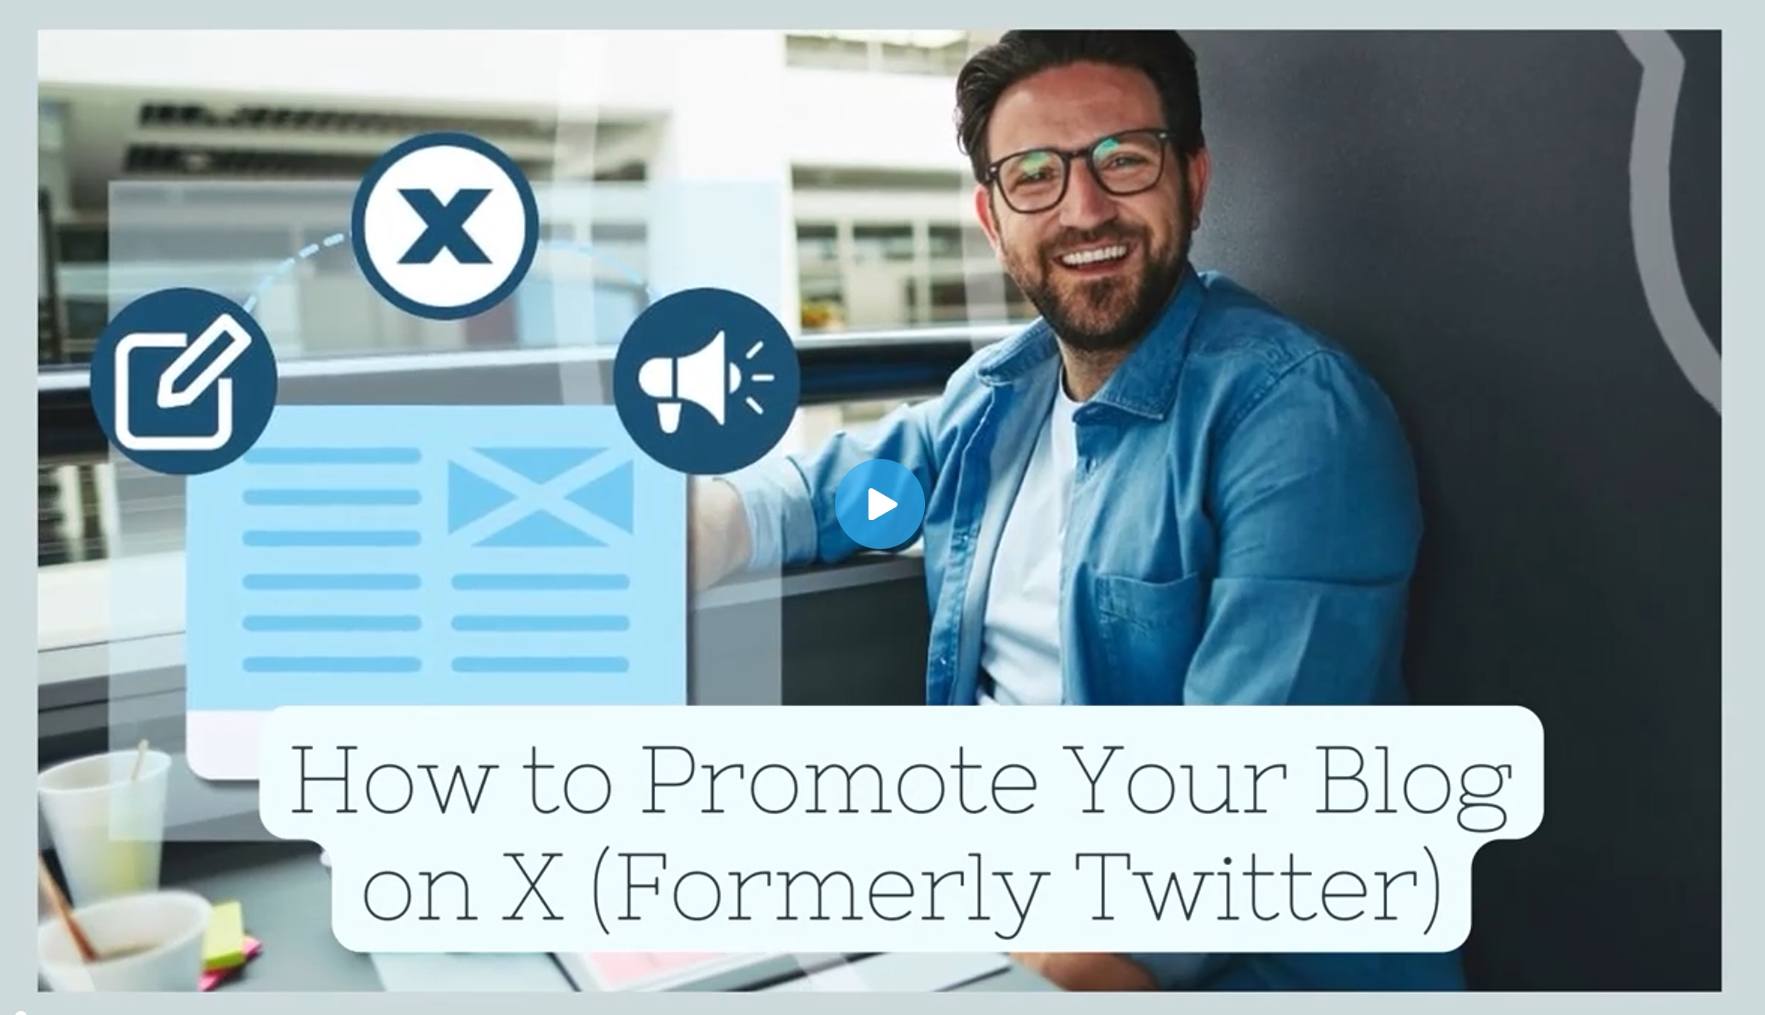 How to Promote Your Blog on X (Formerly Twitter)